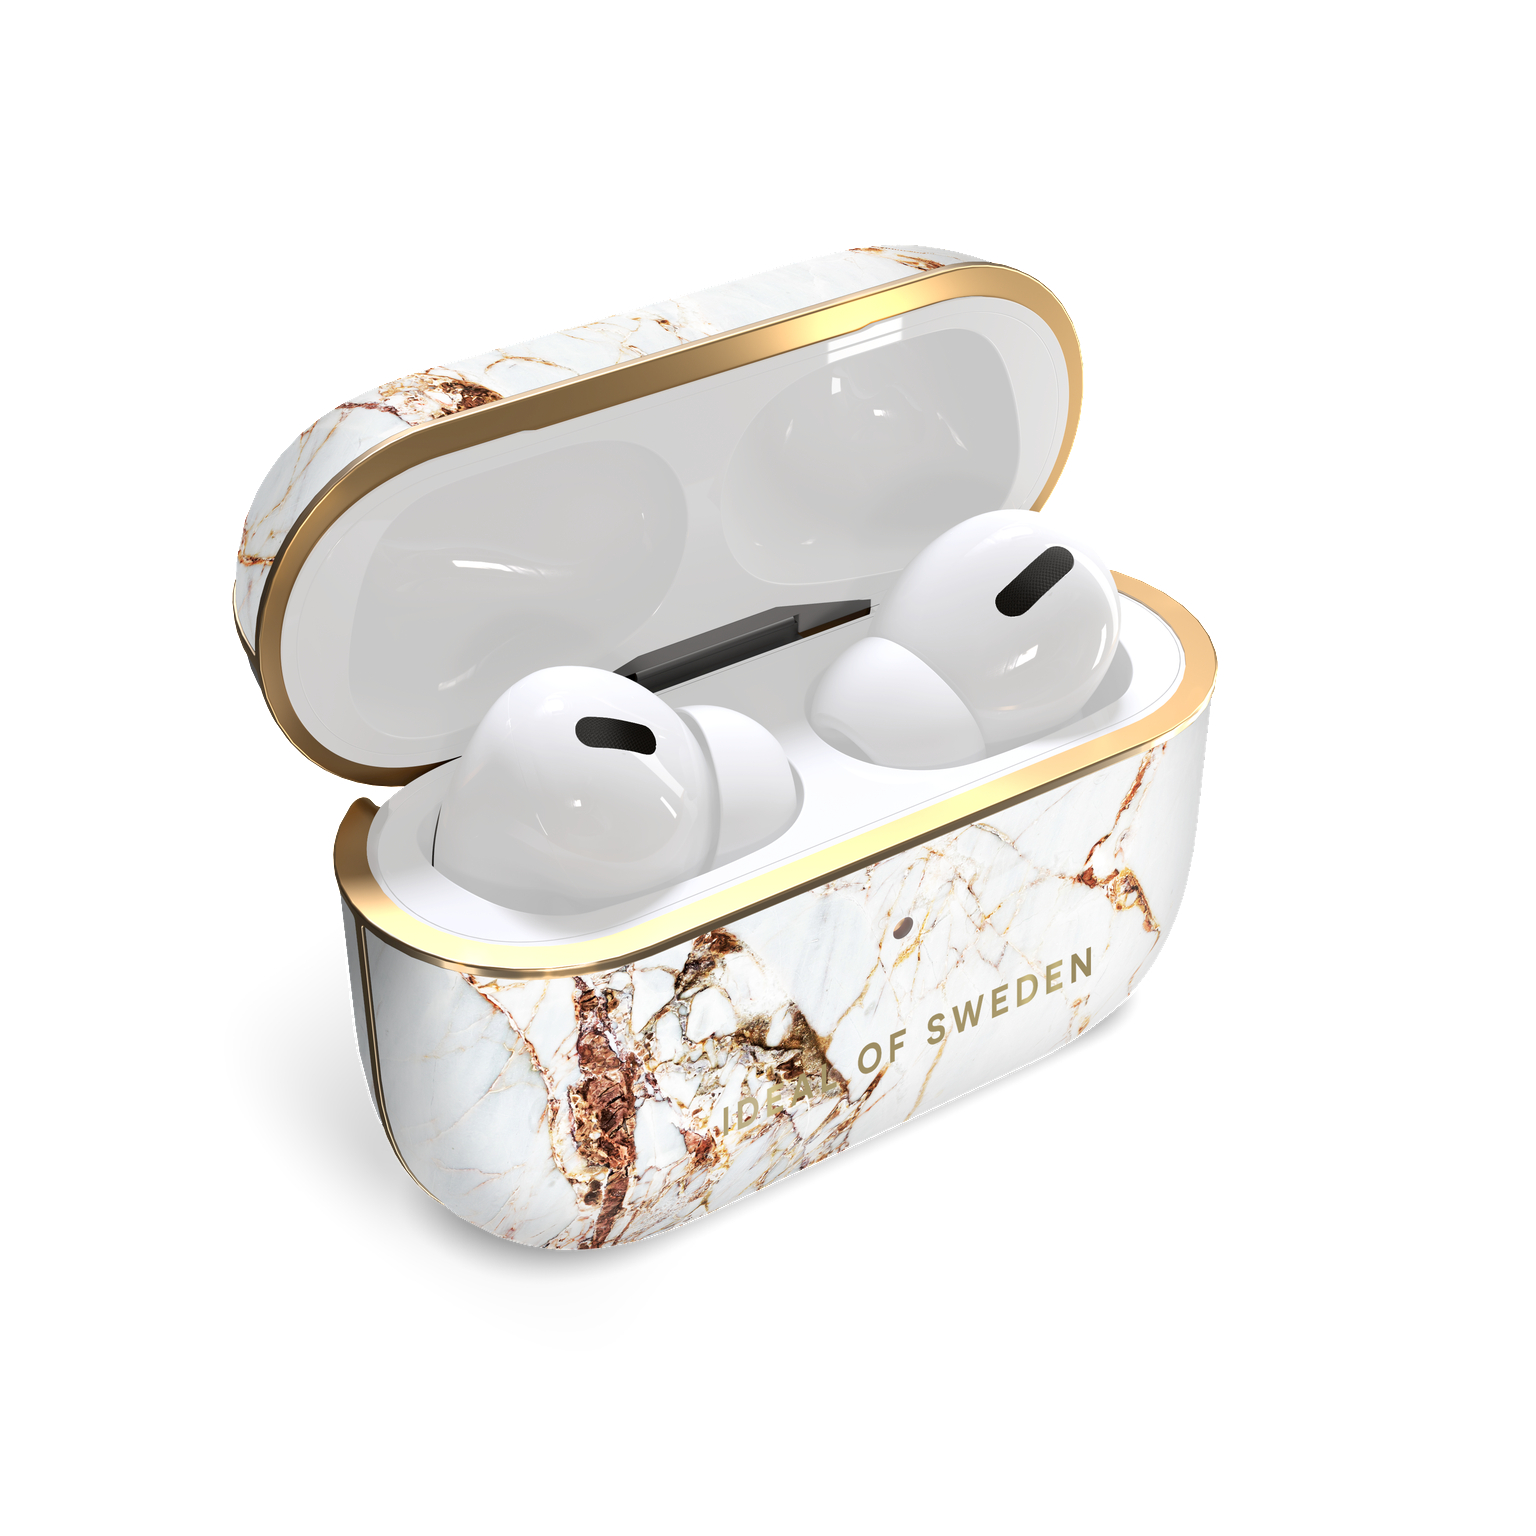 IDEAL IDFAPC-PRO-46 OF SWEDEN Case AirPod